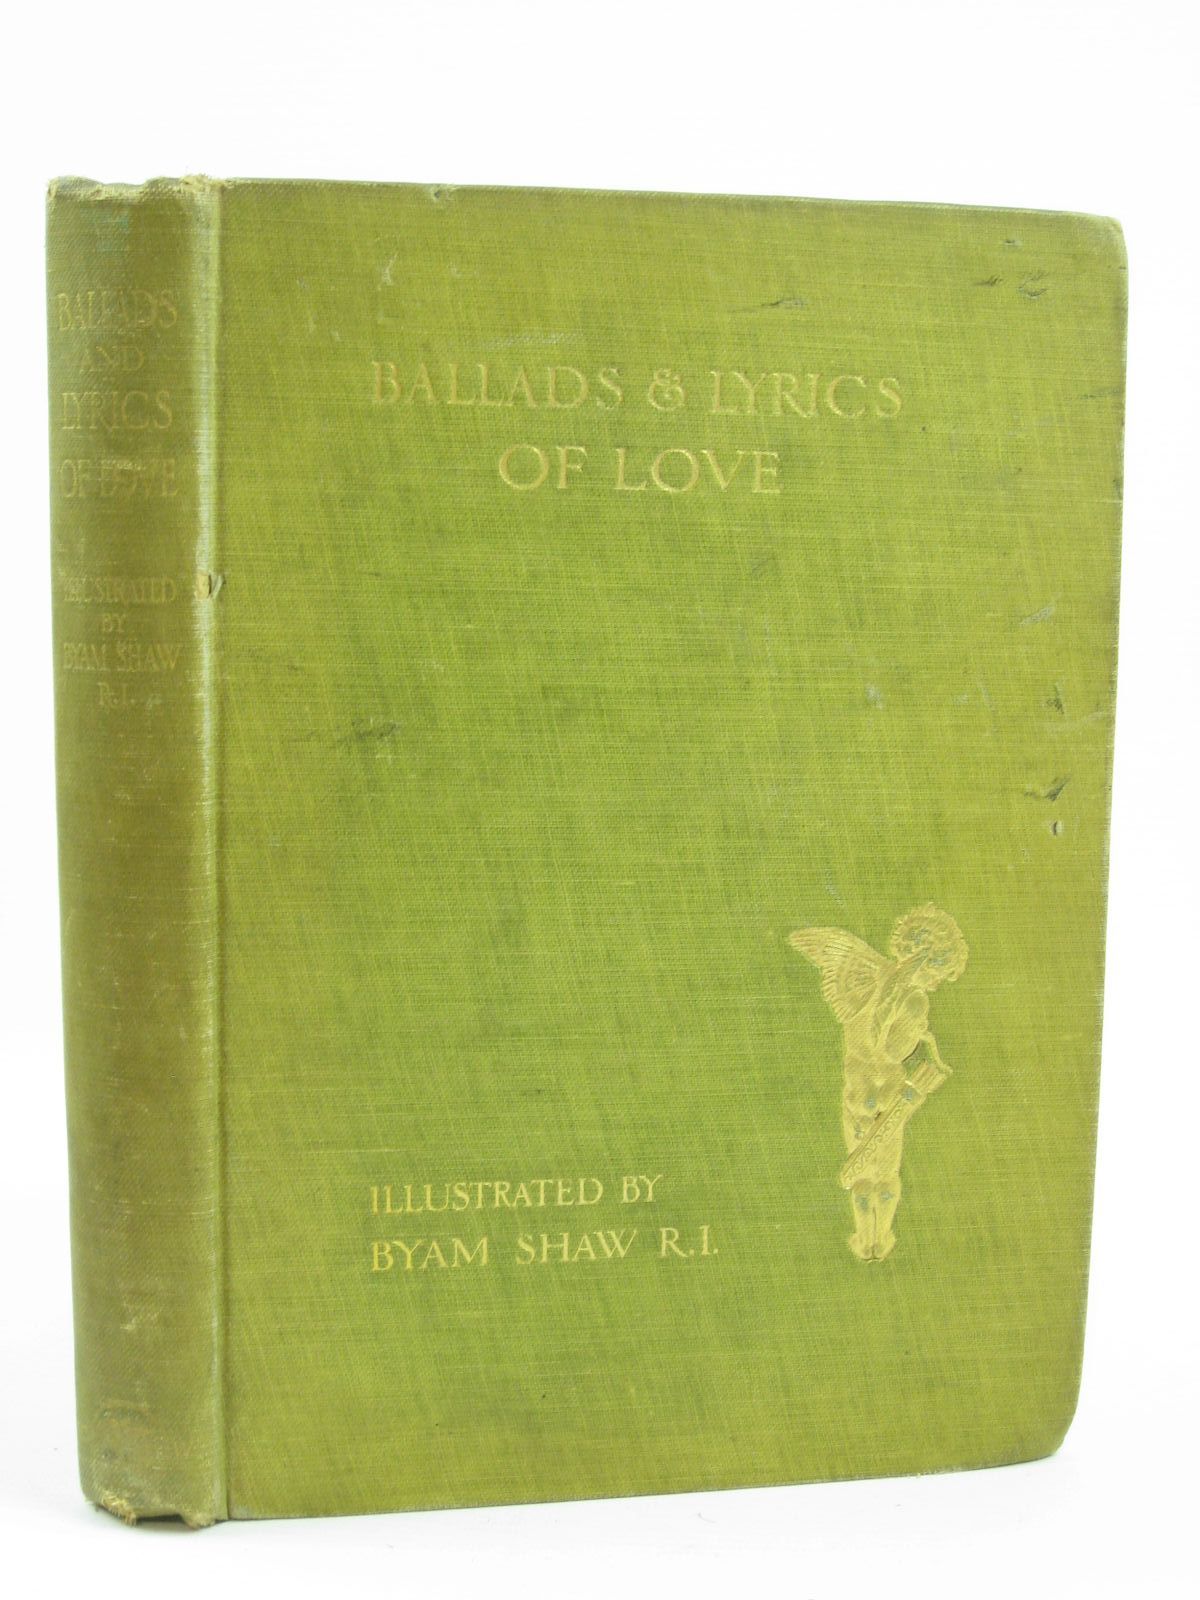 Photo of BALLADS AND LYRICS OF LOVE written by Sidgwick, Frank illustrated by Shaw, Byam published by Chatto & Windus (STOCK CODE: 1406389)  for sale by Stella & Rose's Books